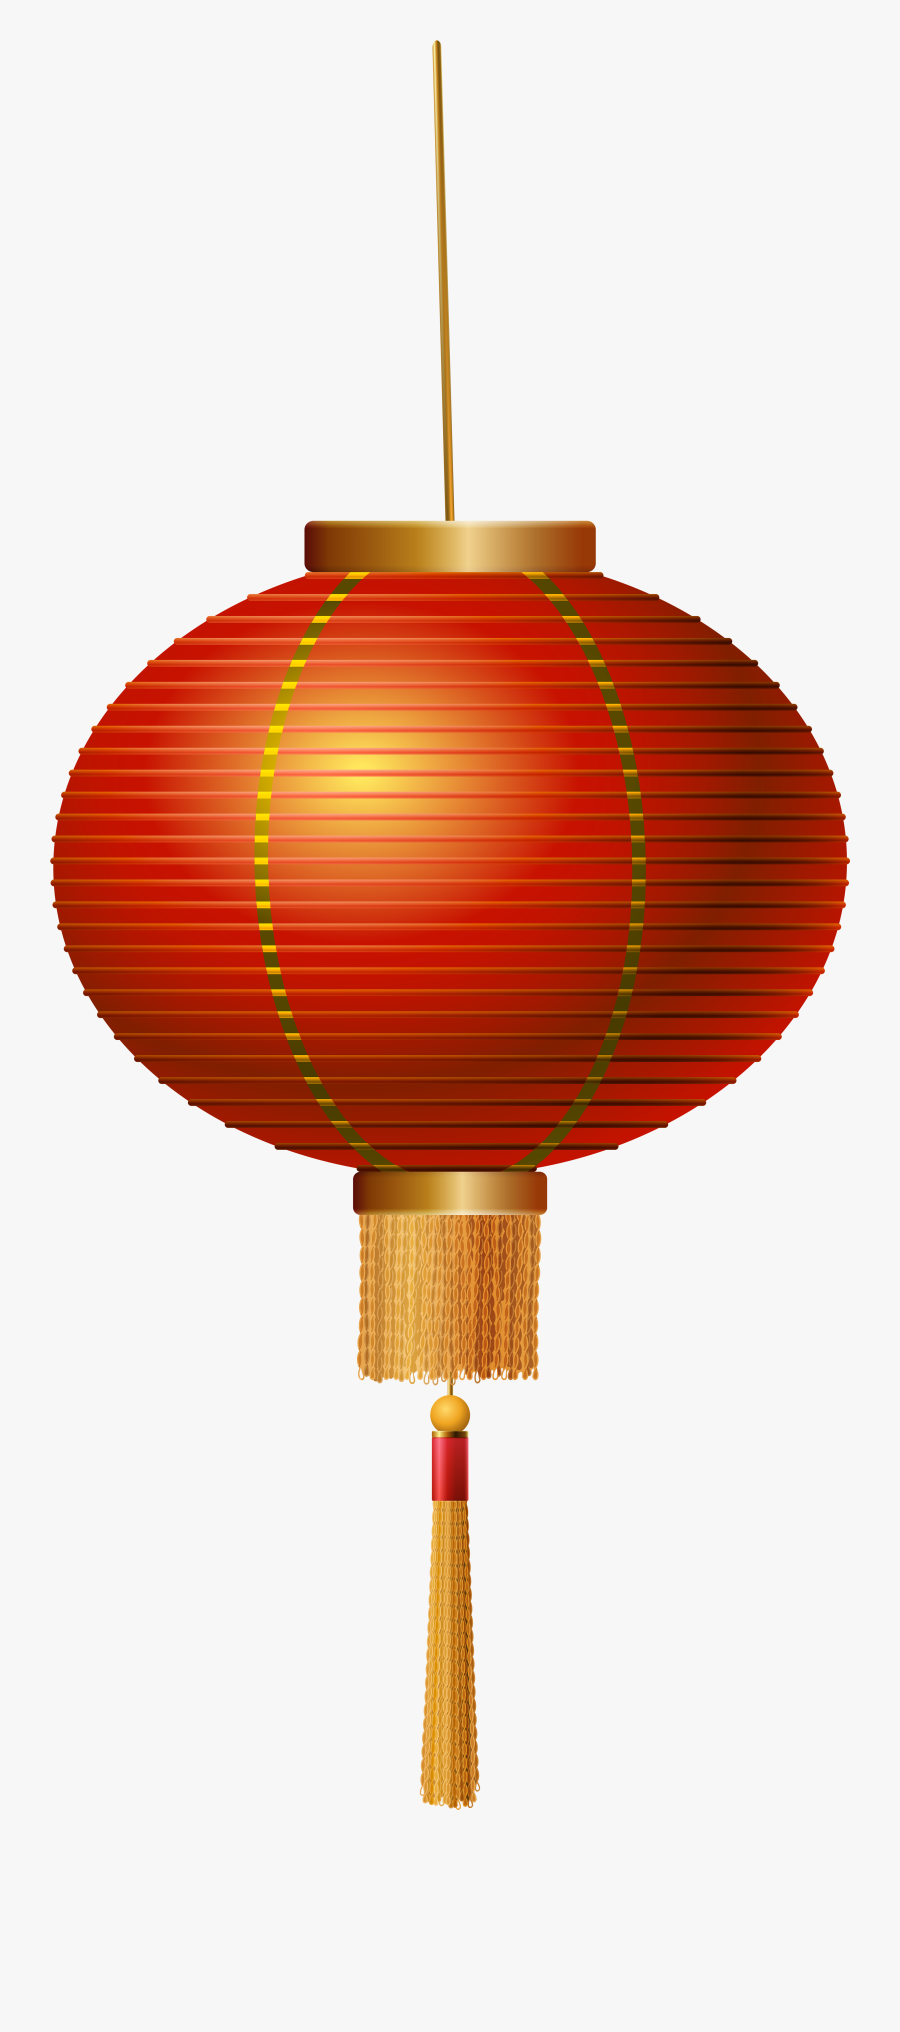 Red Chinese Lantern Png Clip Art - Chinese Lantern Transparent Background, Transparent Clipart